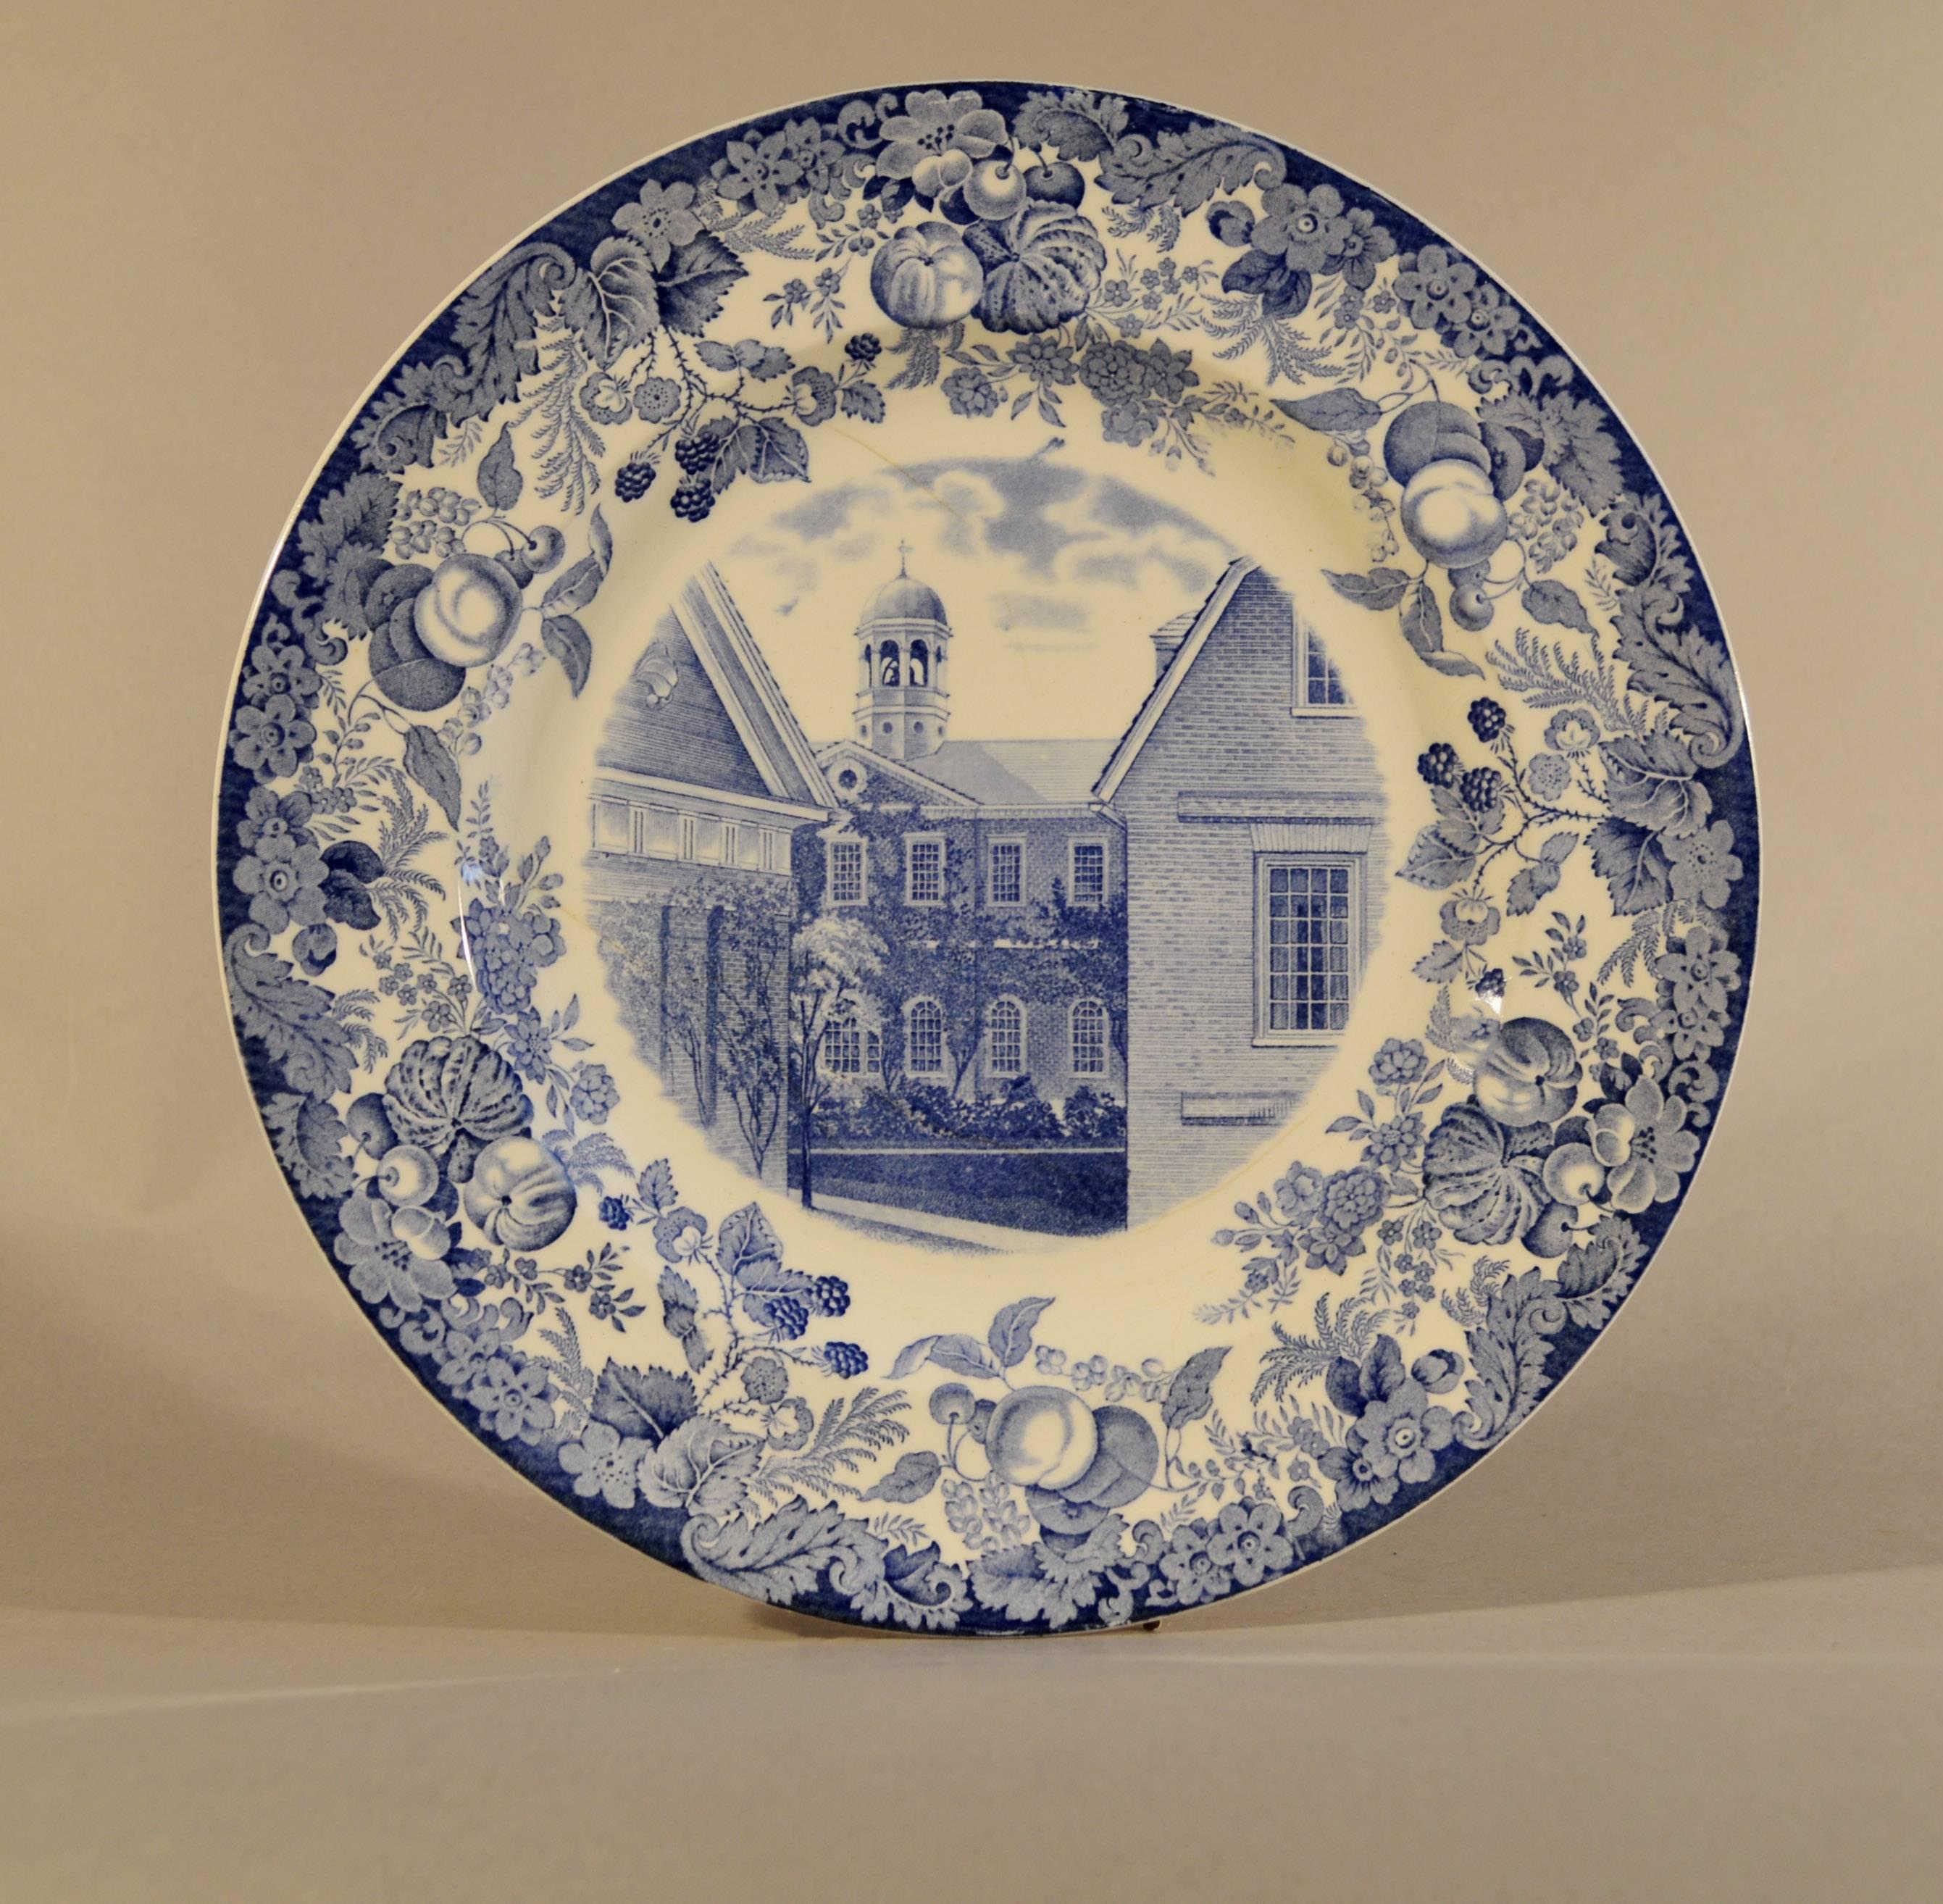 Wedgwood blue and white pottery set of 12 plates with harvard scenes, 
1927.

The series depicts different views of Harvard Univerity-

Holden Chapel
Massachusetts Straus
Memorial Hall
Medical School
Library of the school of Business